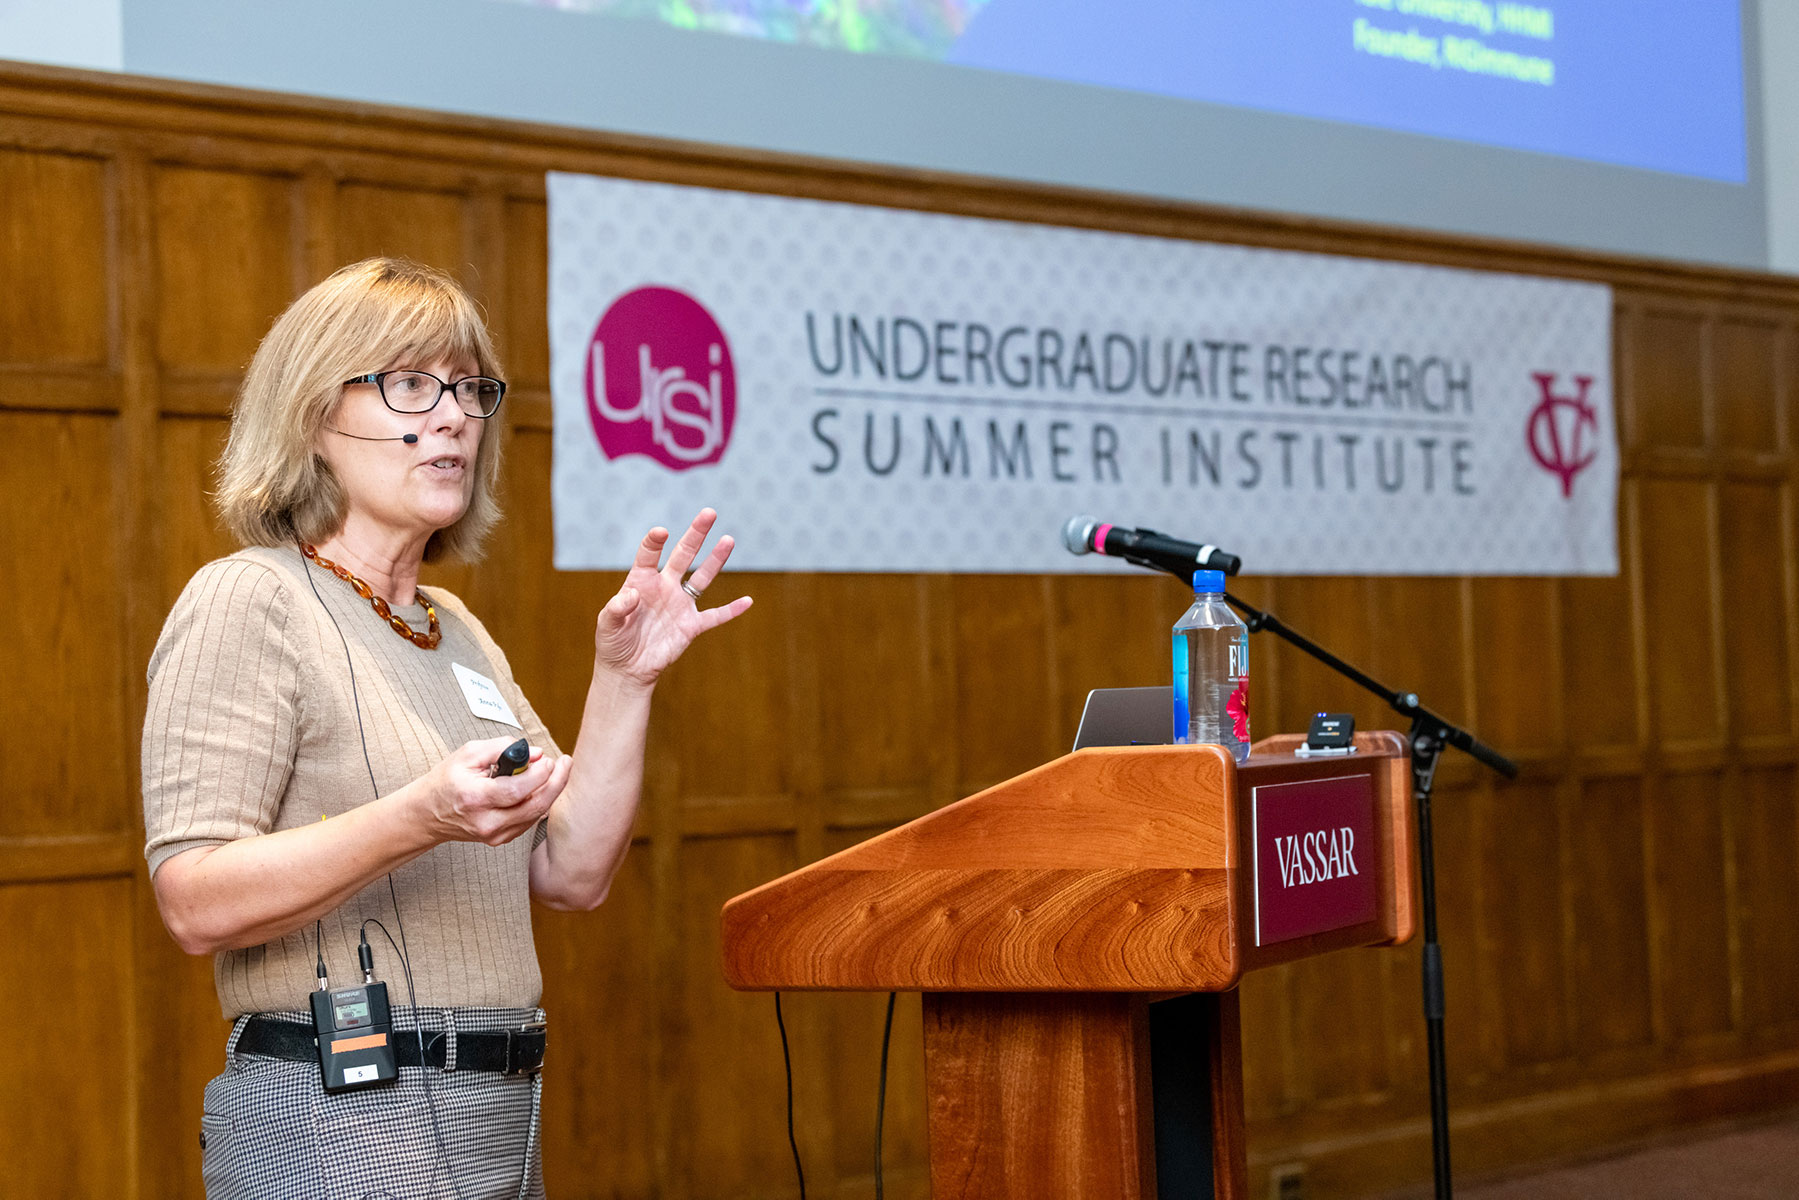 Person standing at a podium on a stage with a banner in the background that reads, "URSI: Undergraduate Research Summer Institute."